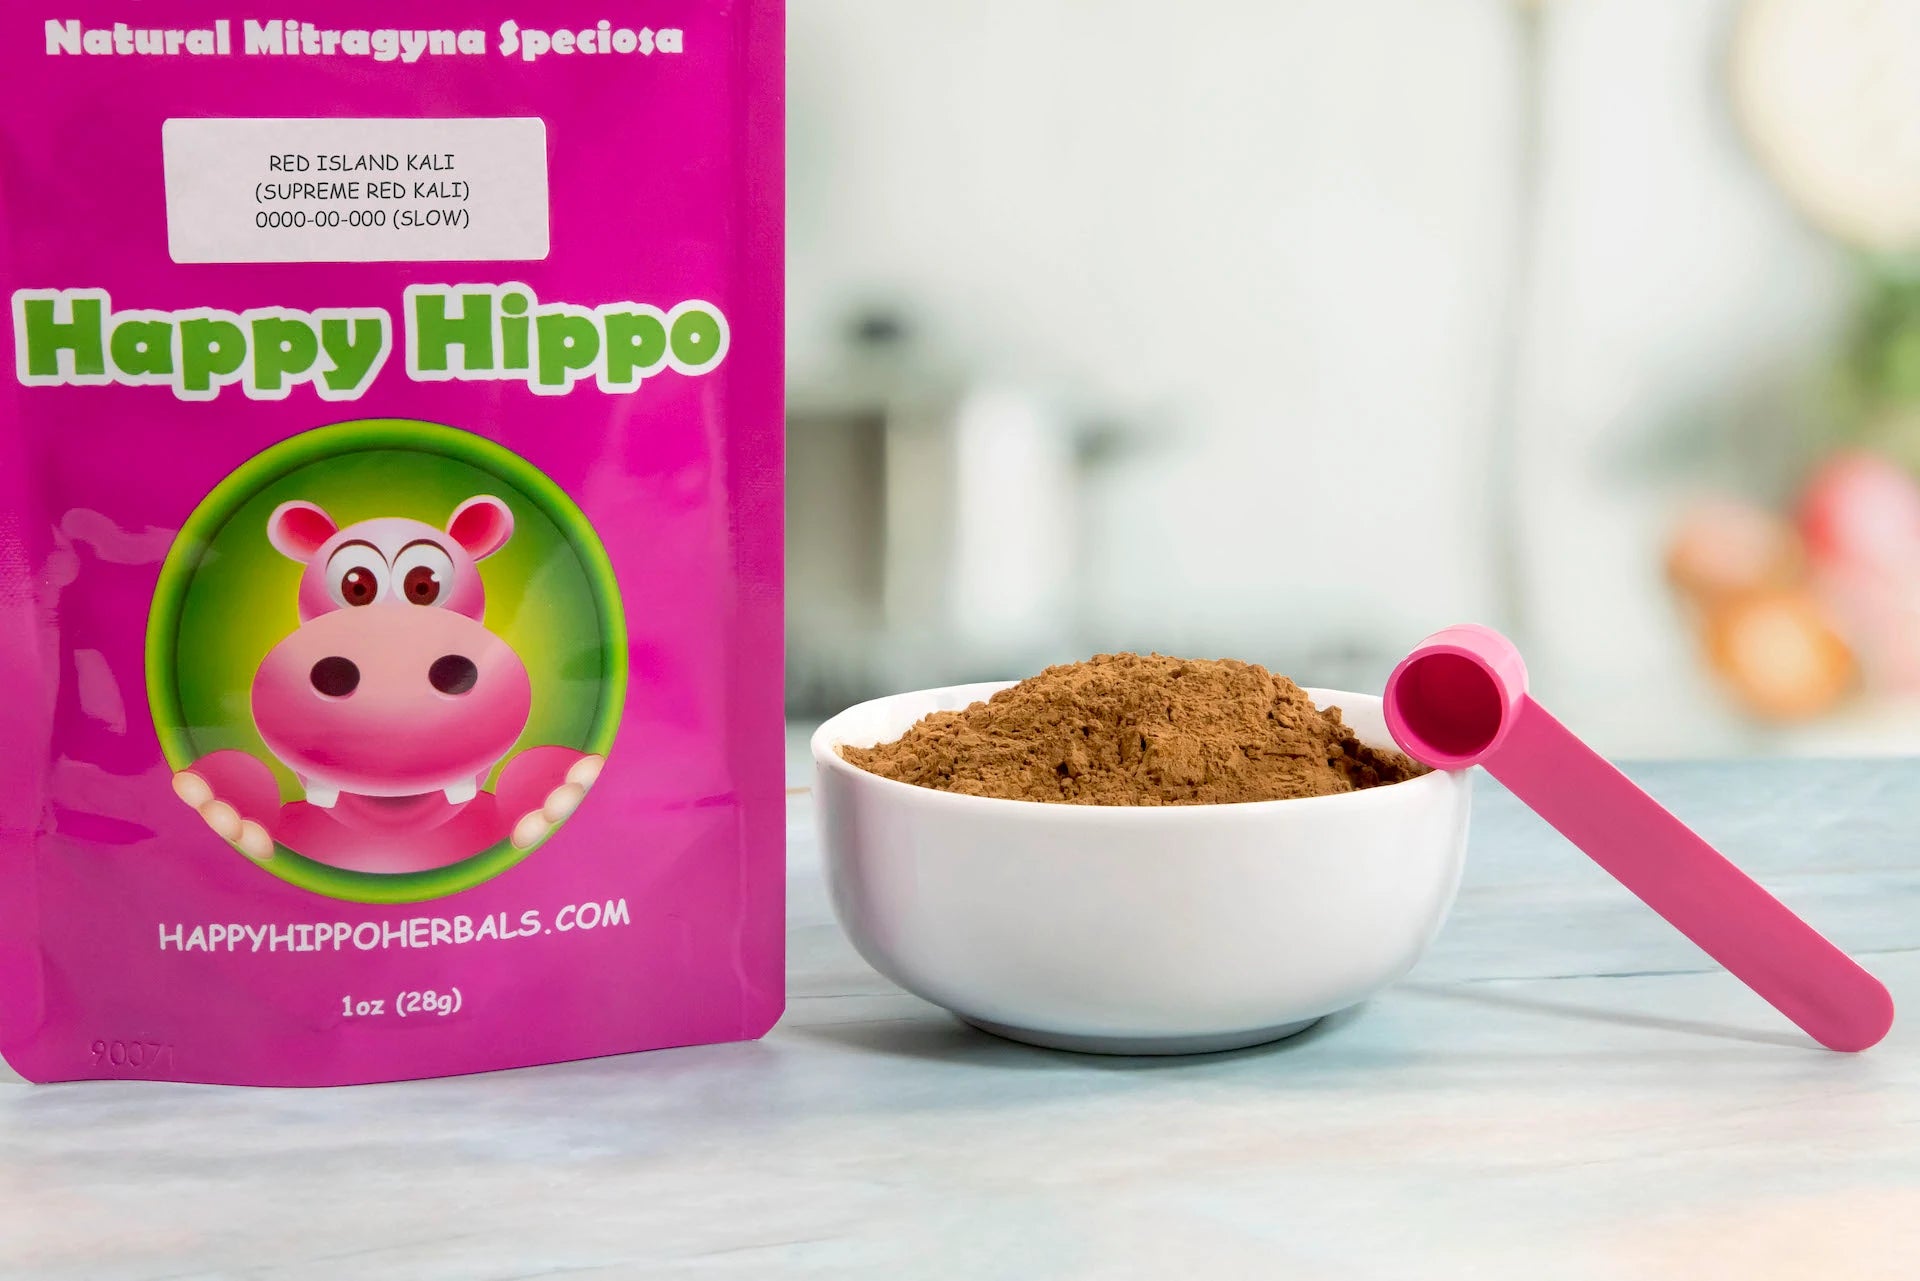 Product image depicting a Happy Hippo Herbals branded, 1oz packet of Red Island Kali Kratom Powder (Supreme Red Kali); Sitting next to the packet is a white bowl heaped with a mound of loose Red Island Kali Kratom Powder, and a 1gram little pink measuring scoop!